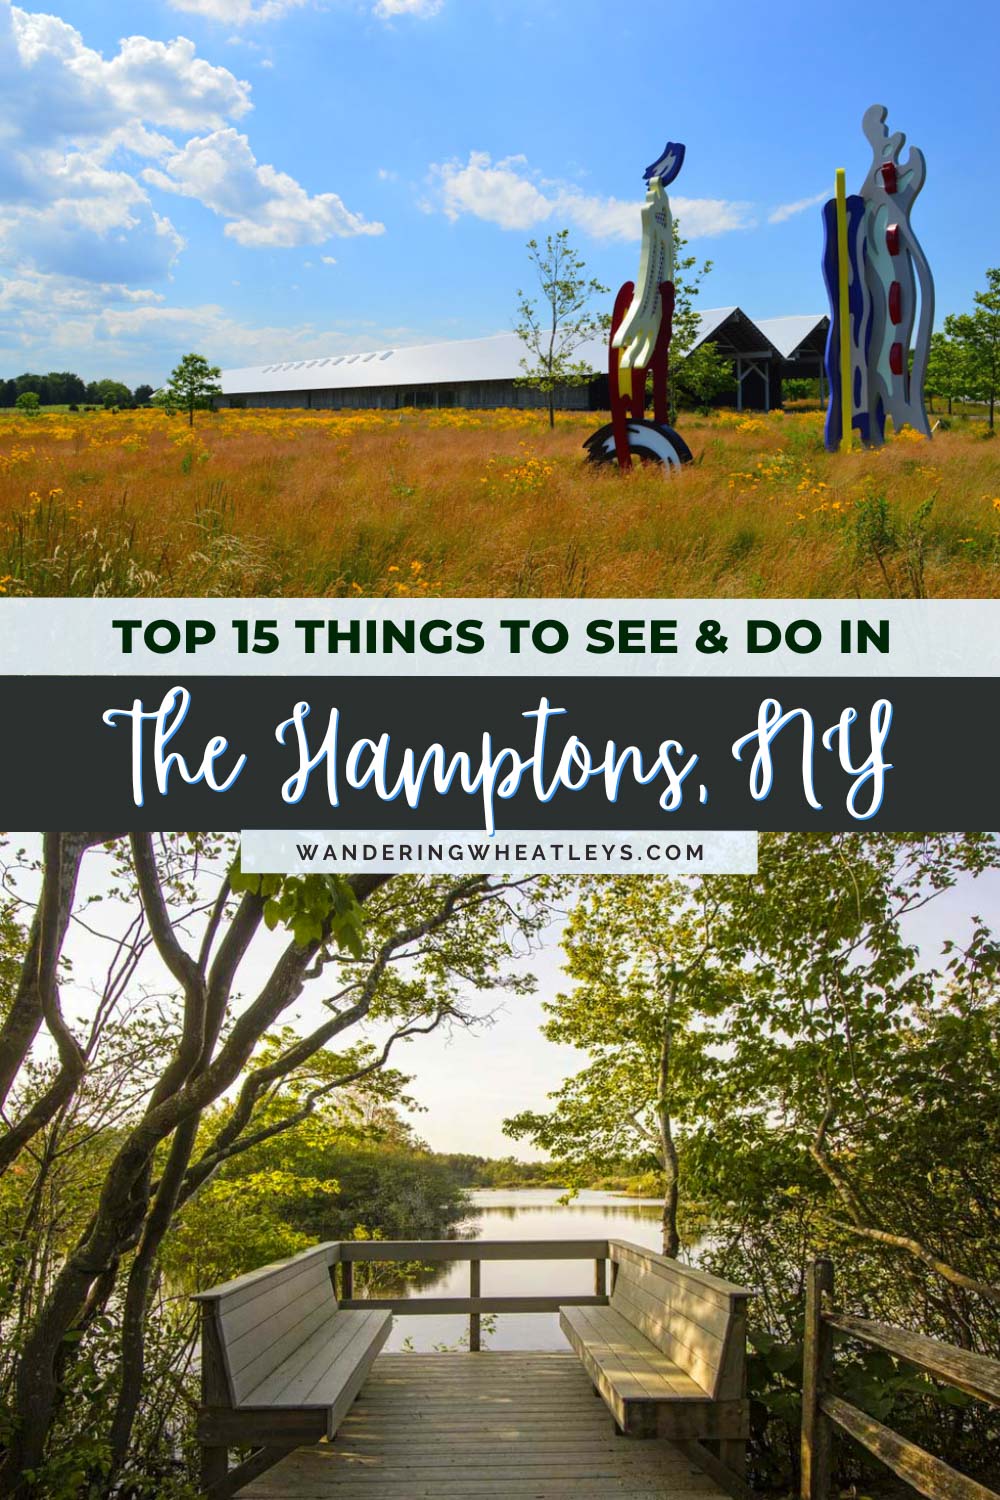 The Best Things to do in The Hamptons